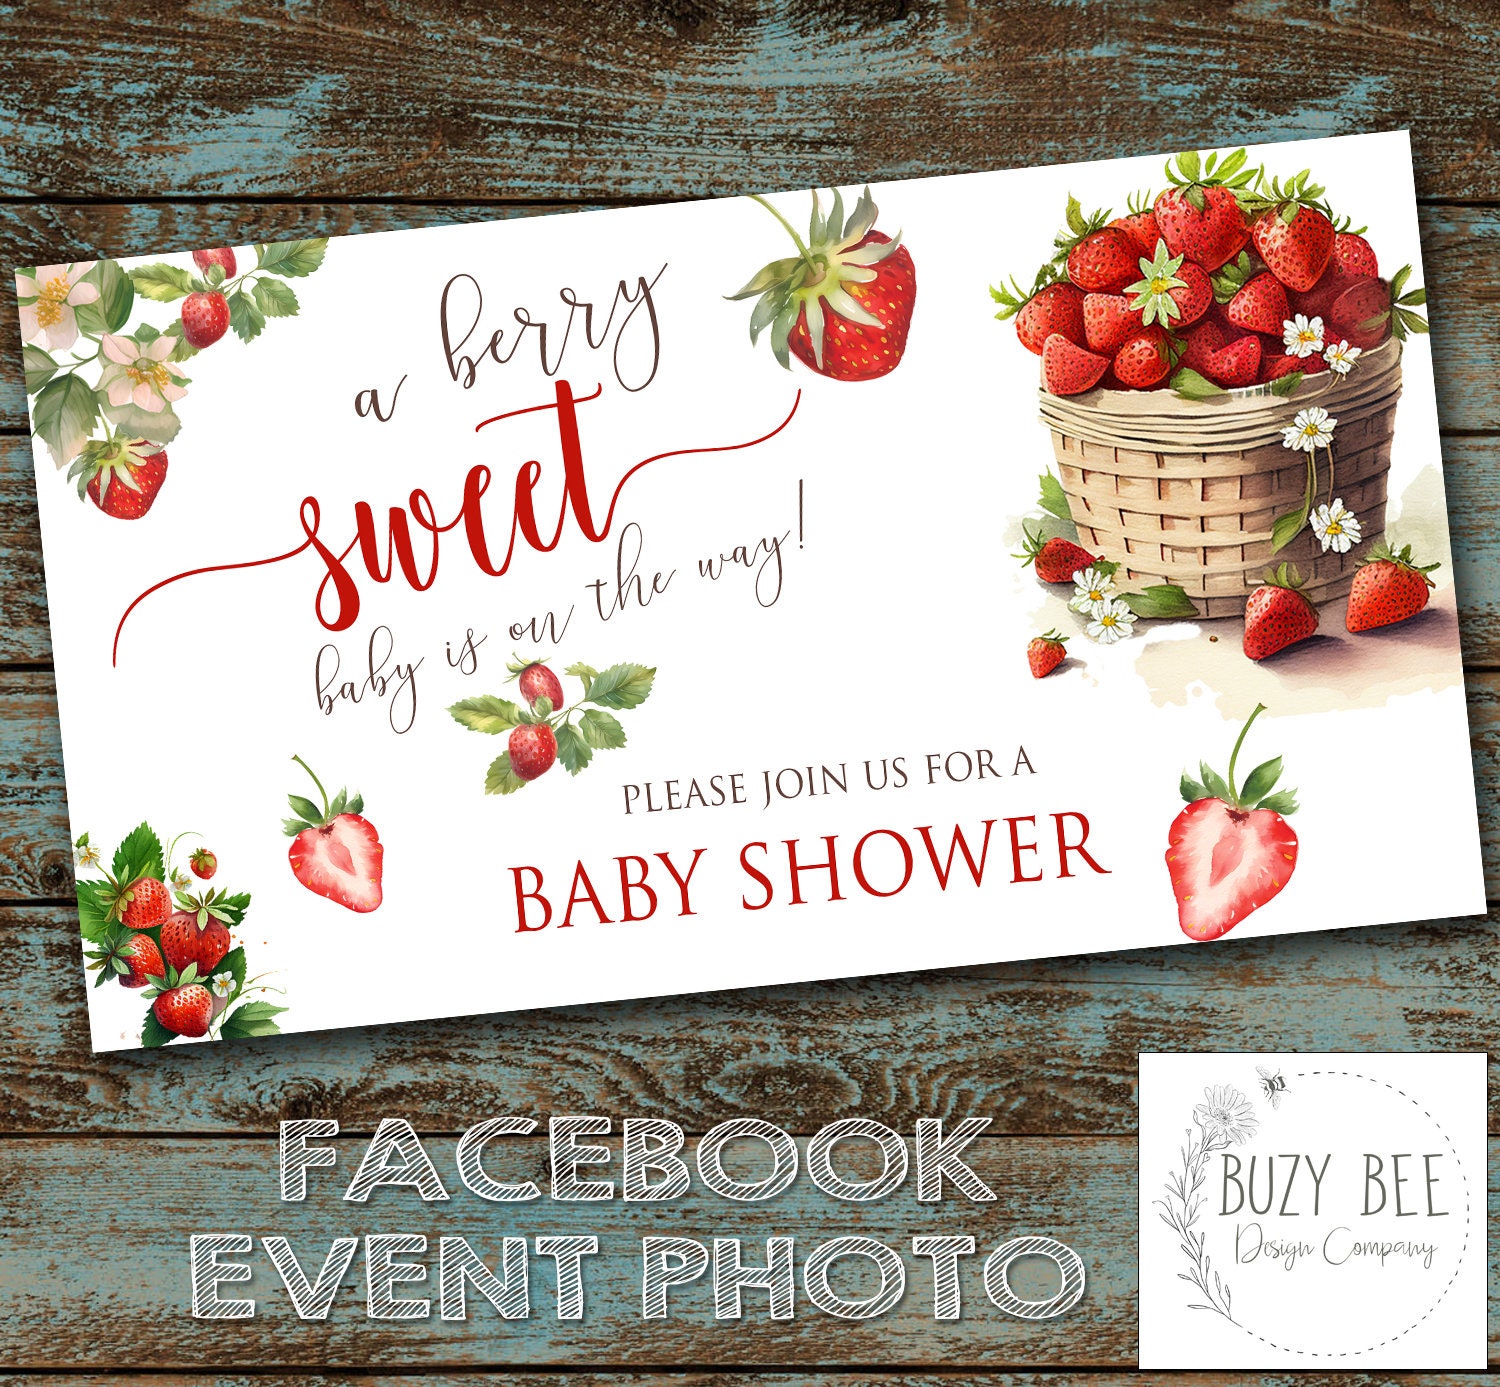 Strawberry Baby Shower Decorations, NO-DIY A Berry Sweet Baby Is On The Way  Banner, Berry Sweet Baby Shower Decorations, Strawberry Party Decorations